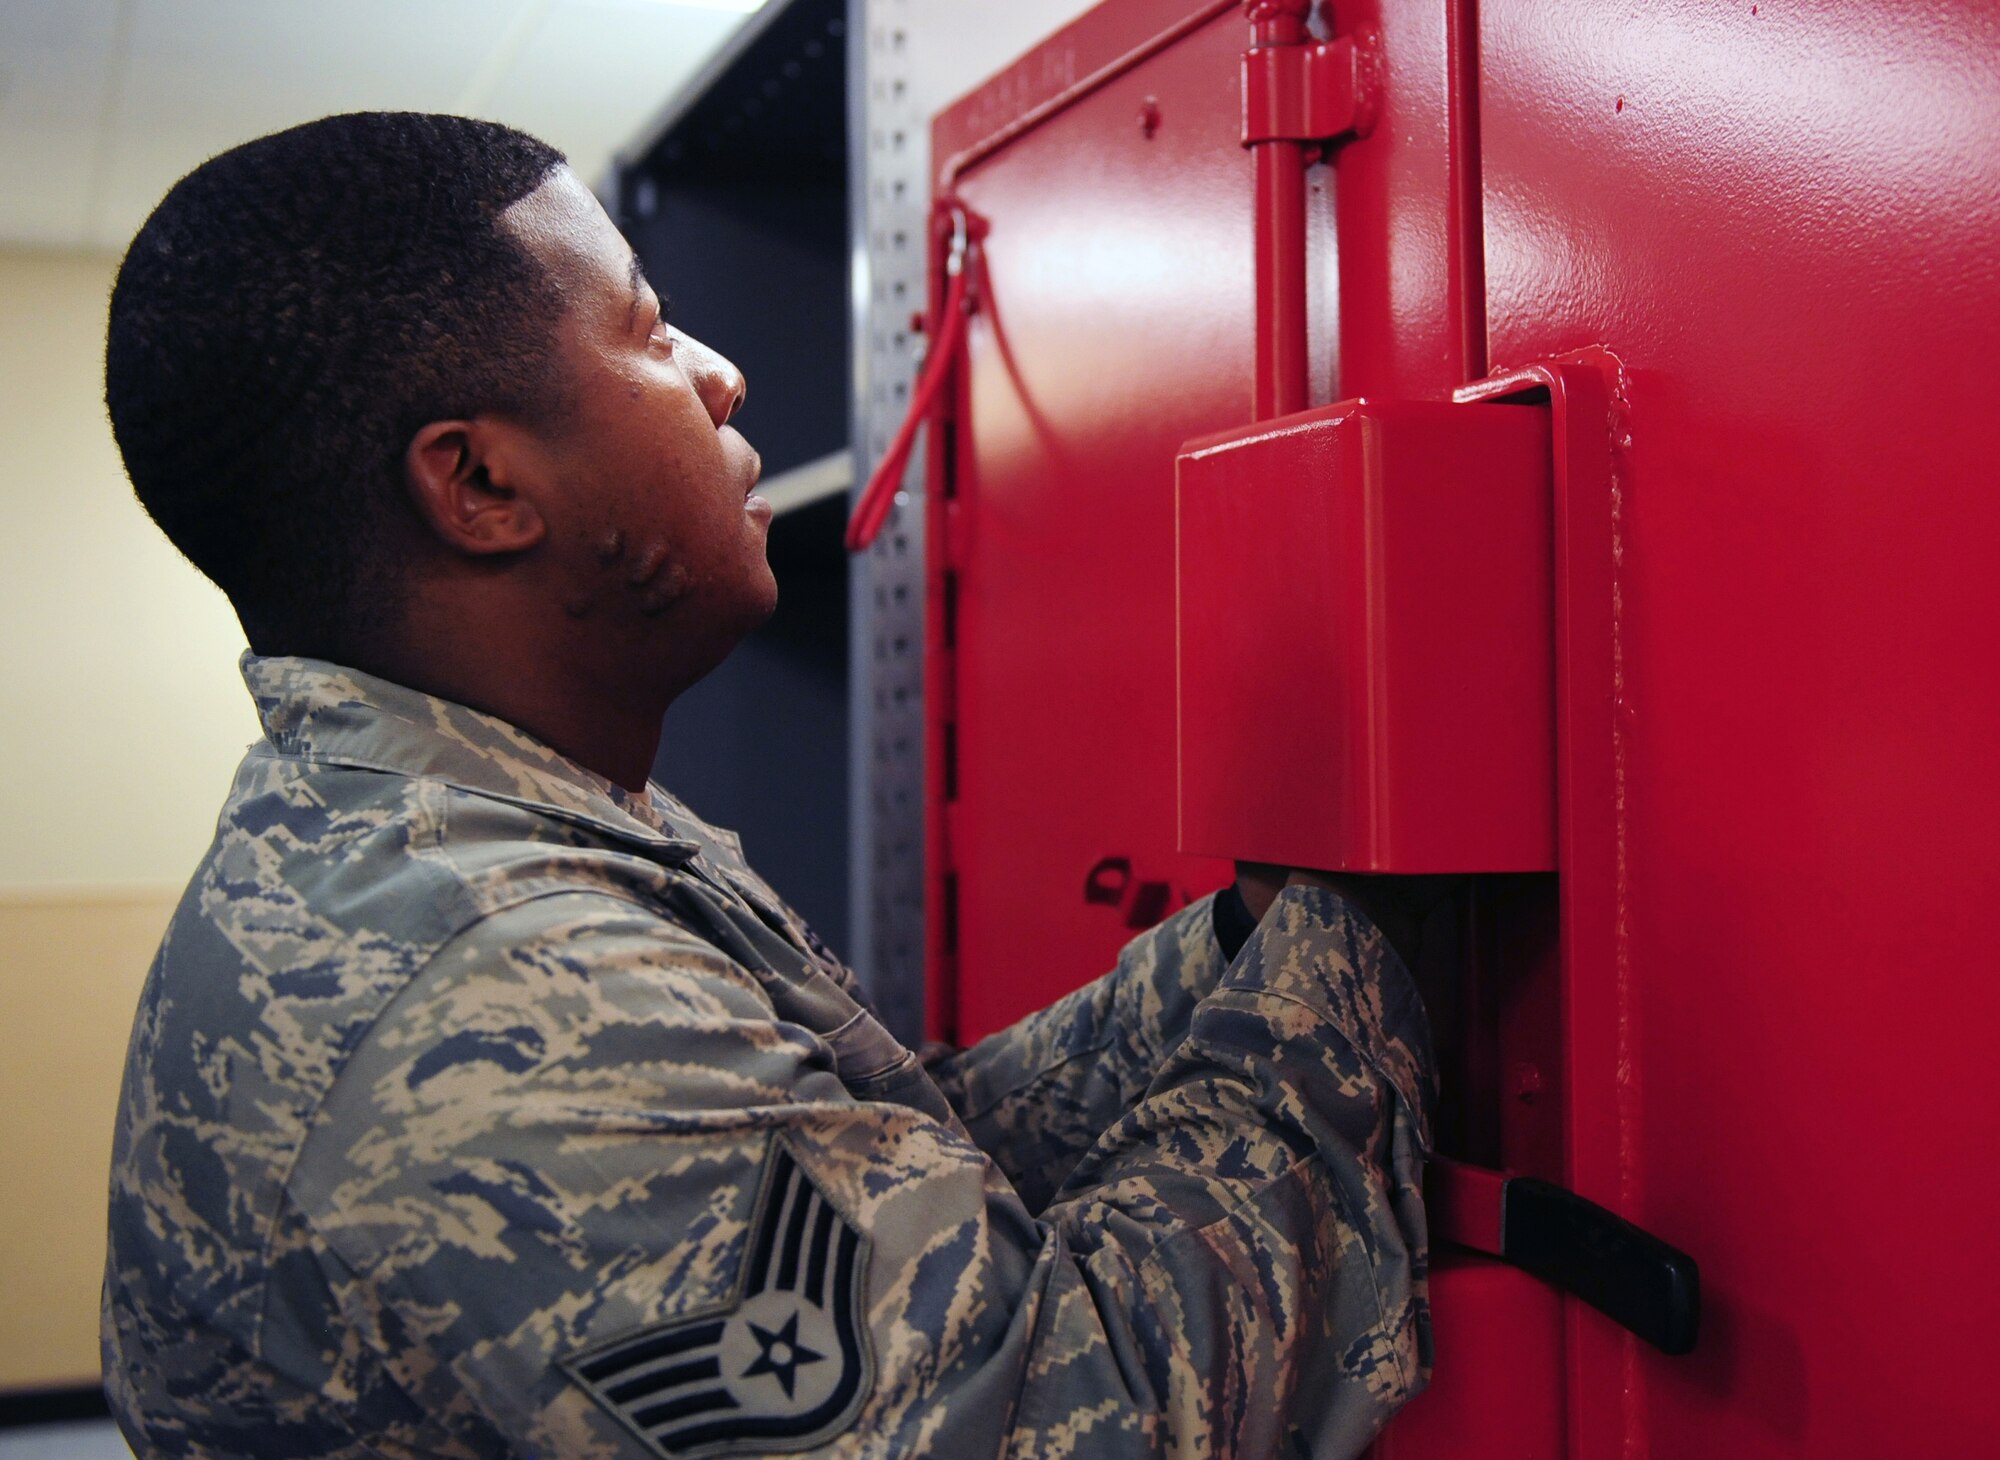 Staff Sgt. Sherman Smith, 2nd Security Forces Squadron, opens a locker in the new 2 SFS building on Barksdale Air Force Base, La., Sept. 15. Smith inspected the explosives cabinet at the new 2 SFS facility which is located near the softball fields off of Range Road. (U.S. Air Force photo/Airman 1st Class Benjamin Gonsier)(RELEASED)